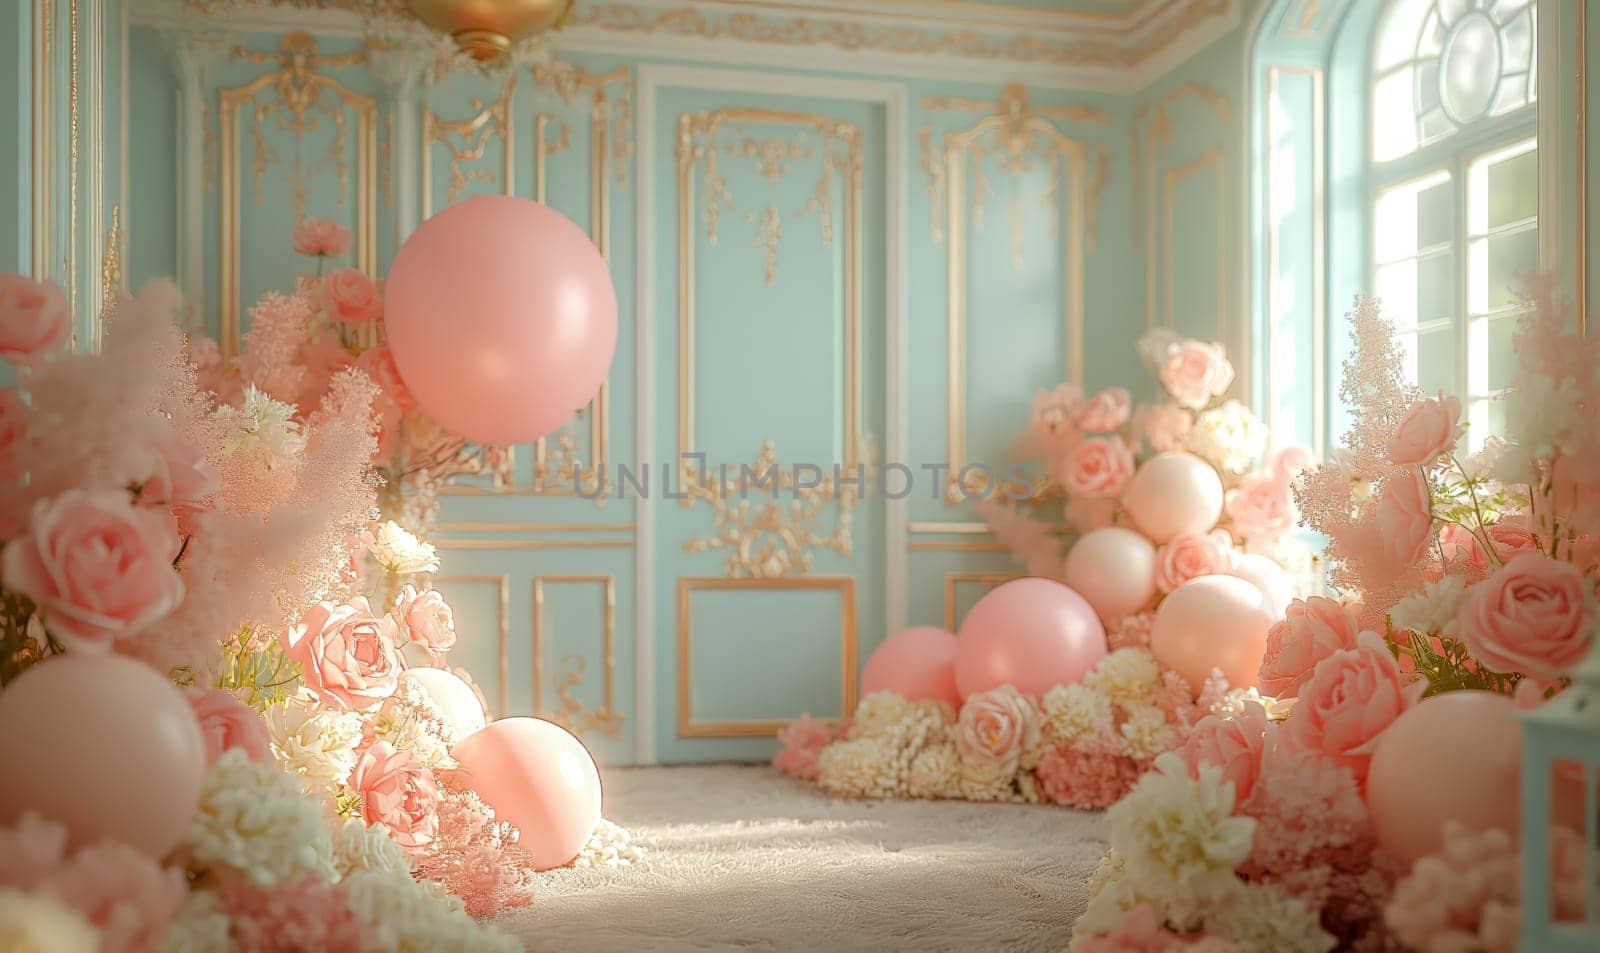 Vibrant Balloons and Flowers Room by Fischeron